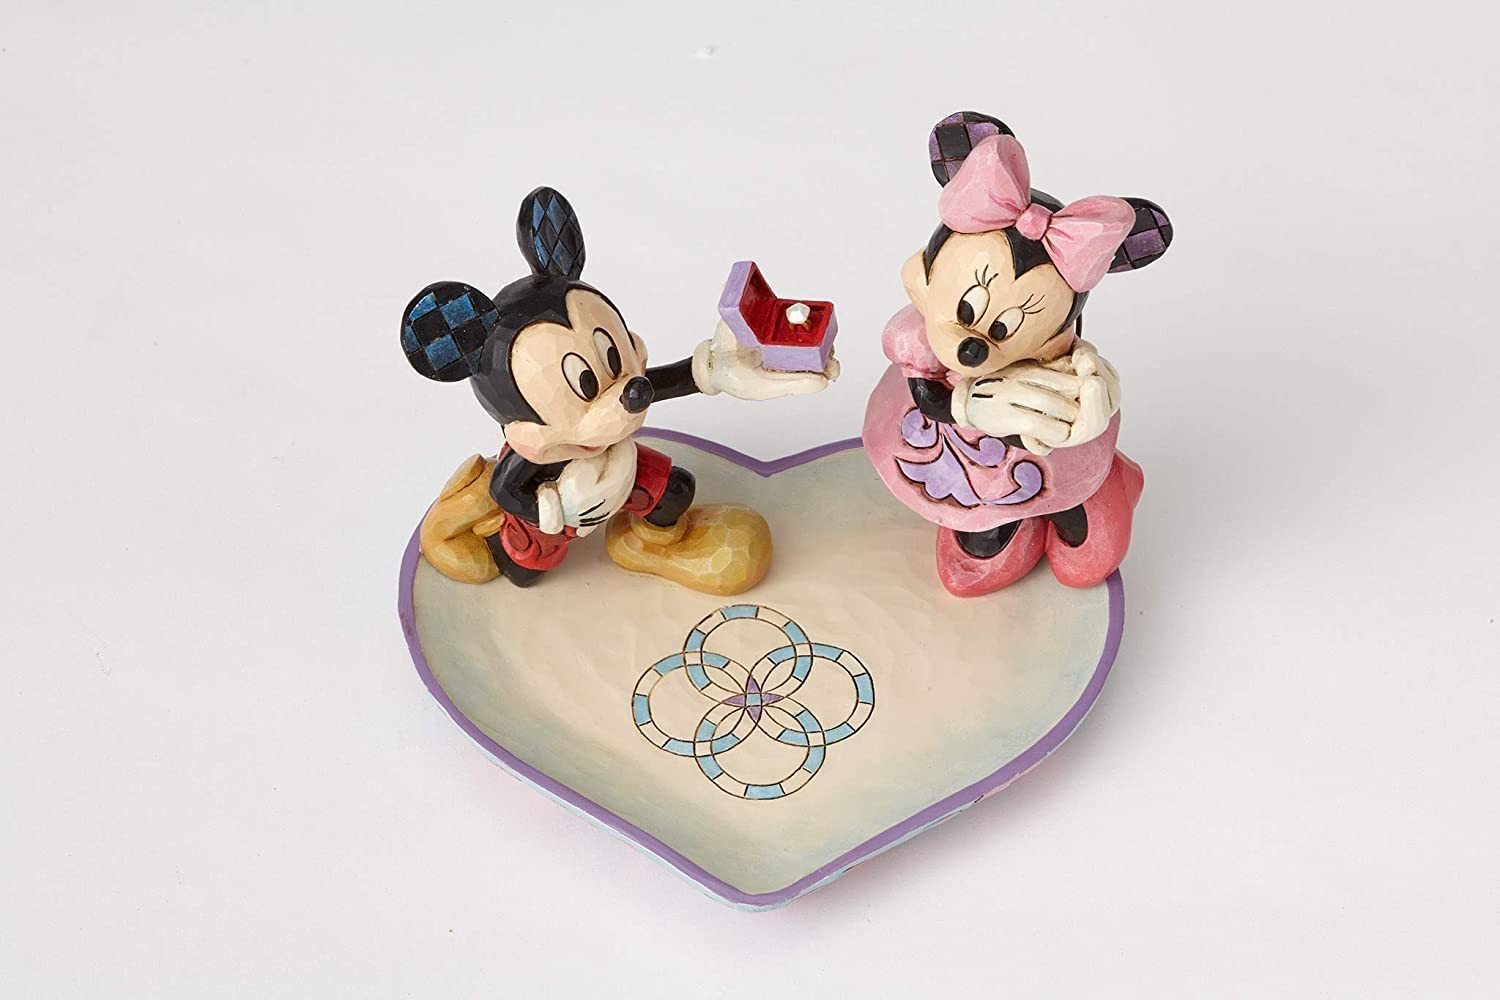 Mickey-minnie-A-Magical-Moment-berlindeluxe-mauese-ring-herz